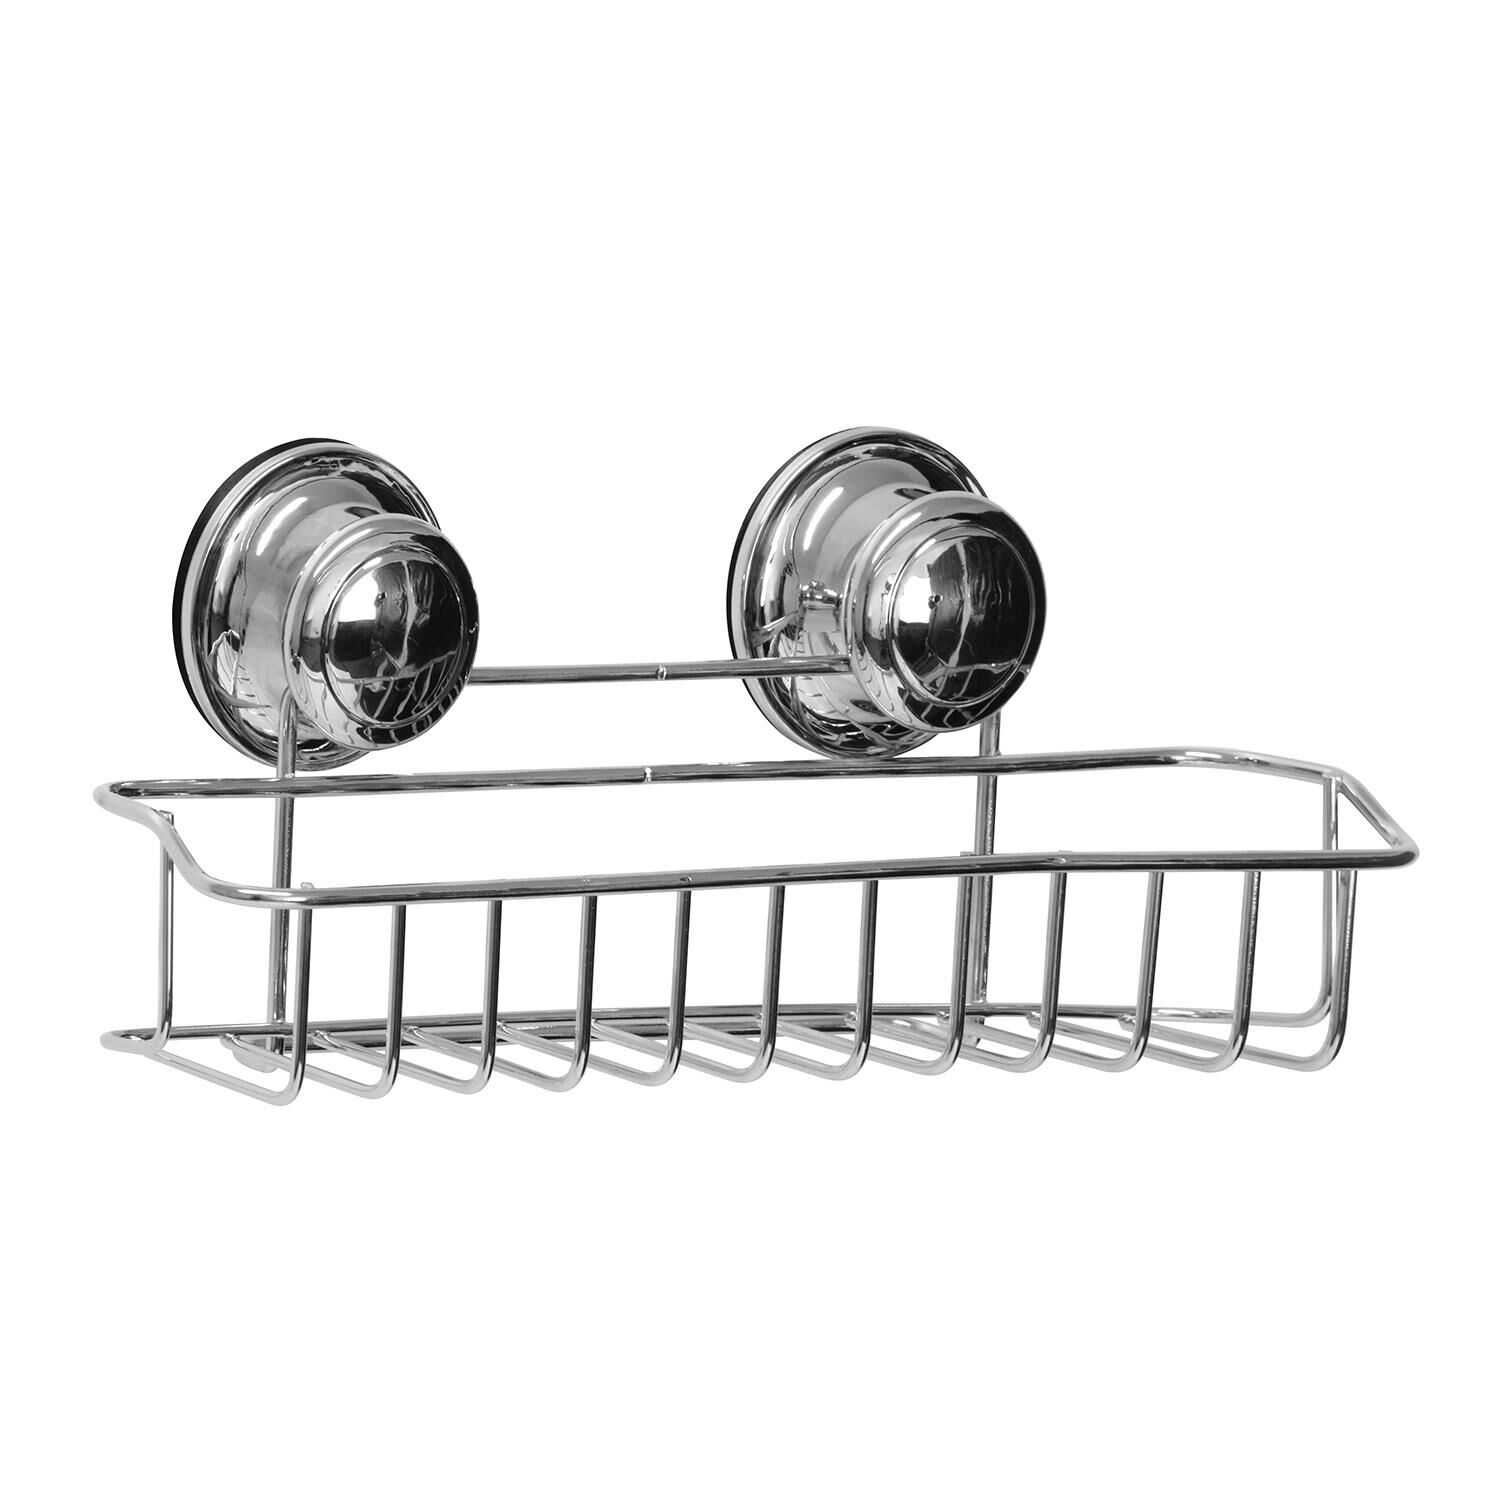 Chrome Shower Caddy with Suction Fix - Home Store + More